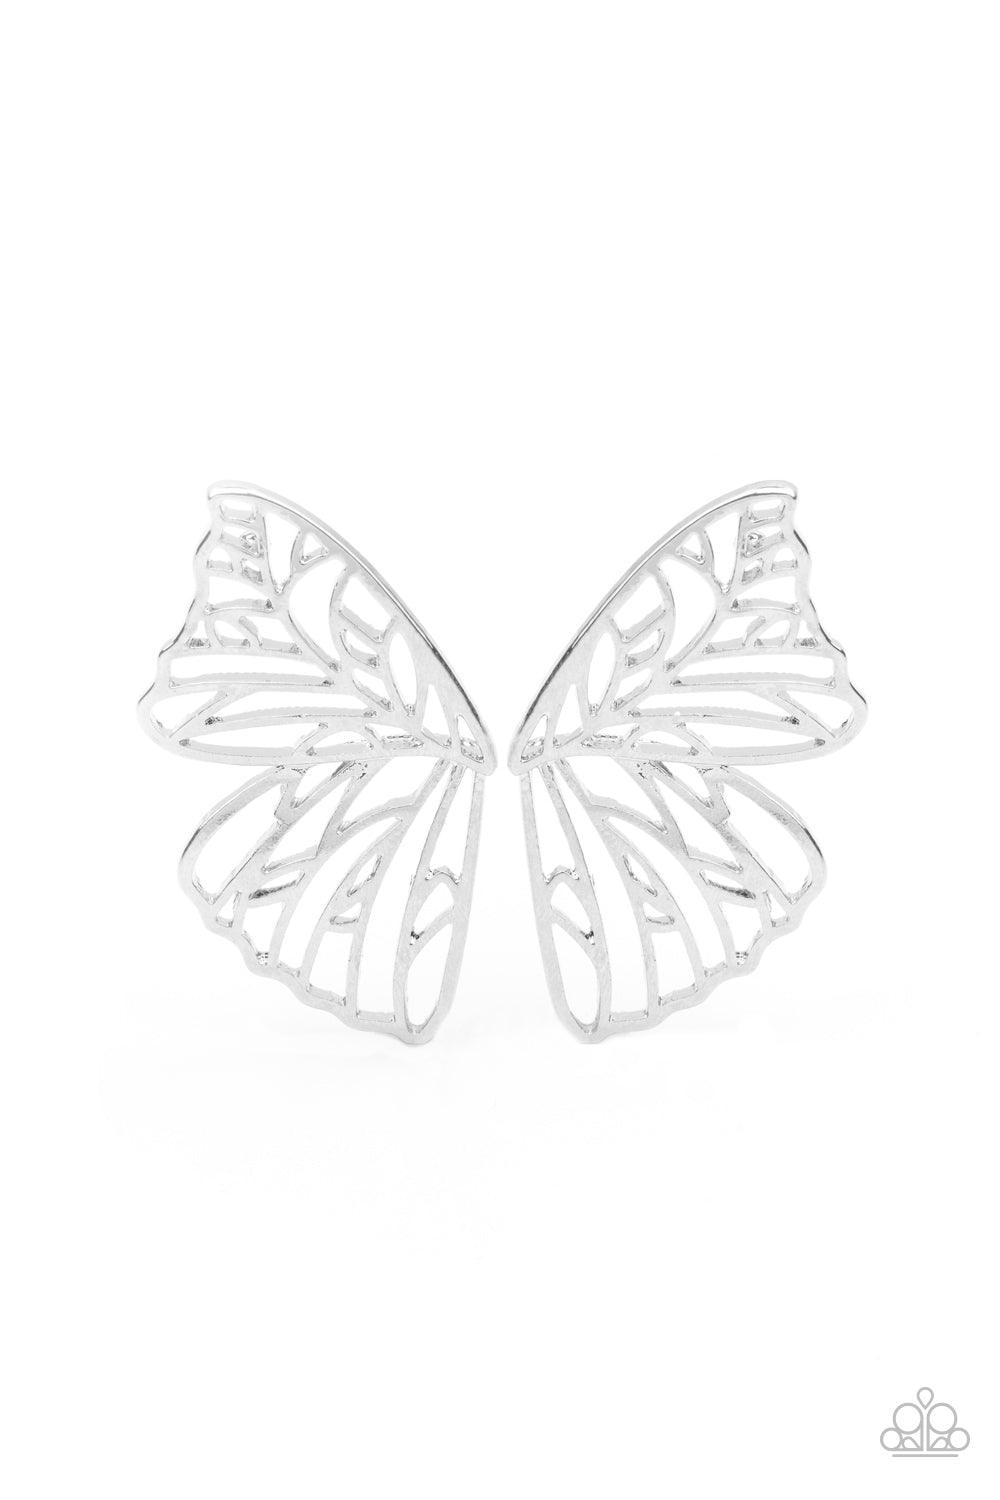 Paparazzi Accessories Butterfly Frills - Silver Shimmery silver bars delicately climb scalloped silver frames, coalescing into a whimsical butterfly wing. Earring attaches to a standard post fitting. Sold as one pair of double-sided post earrings. Jewelry